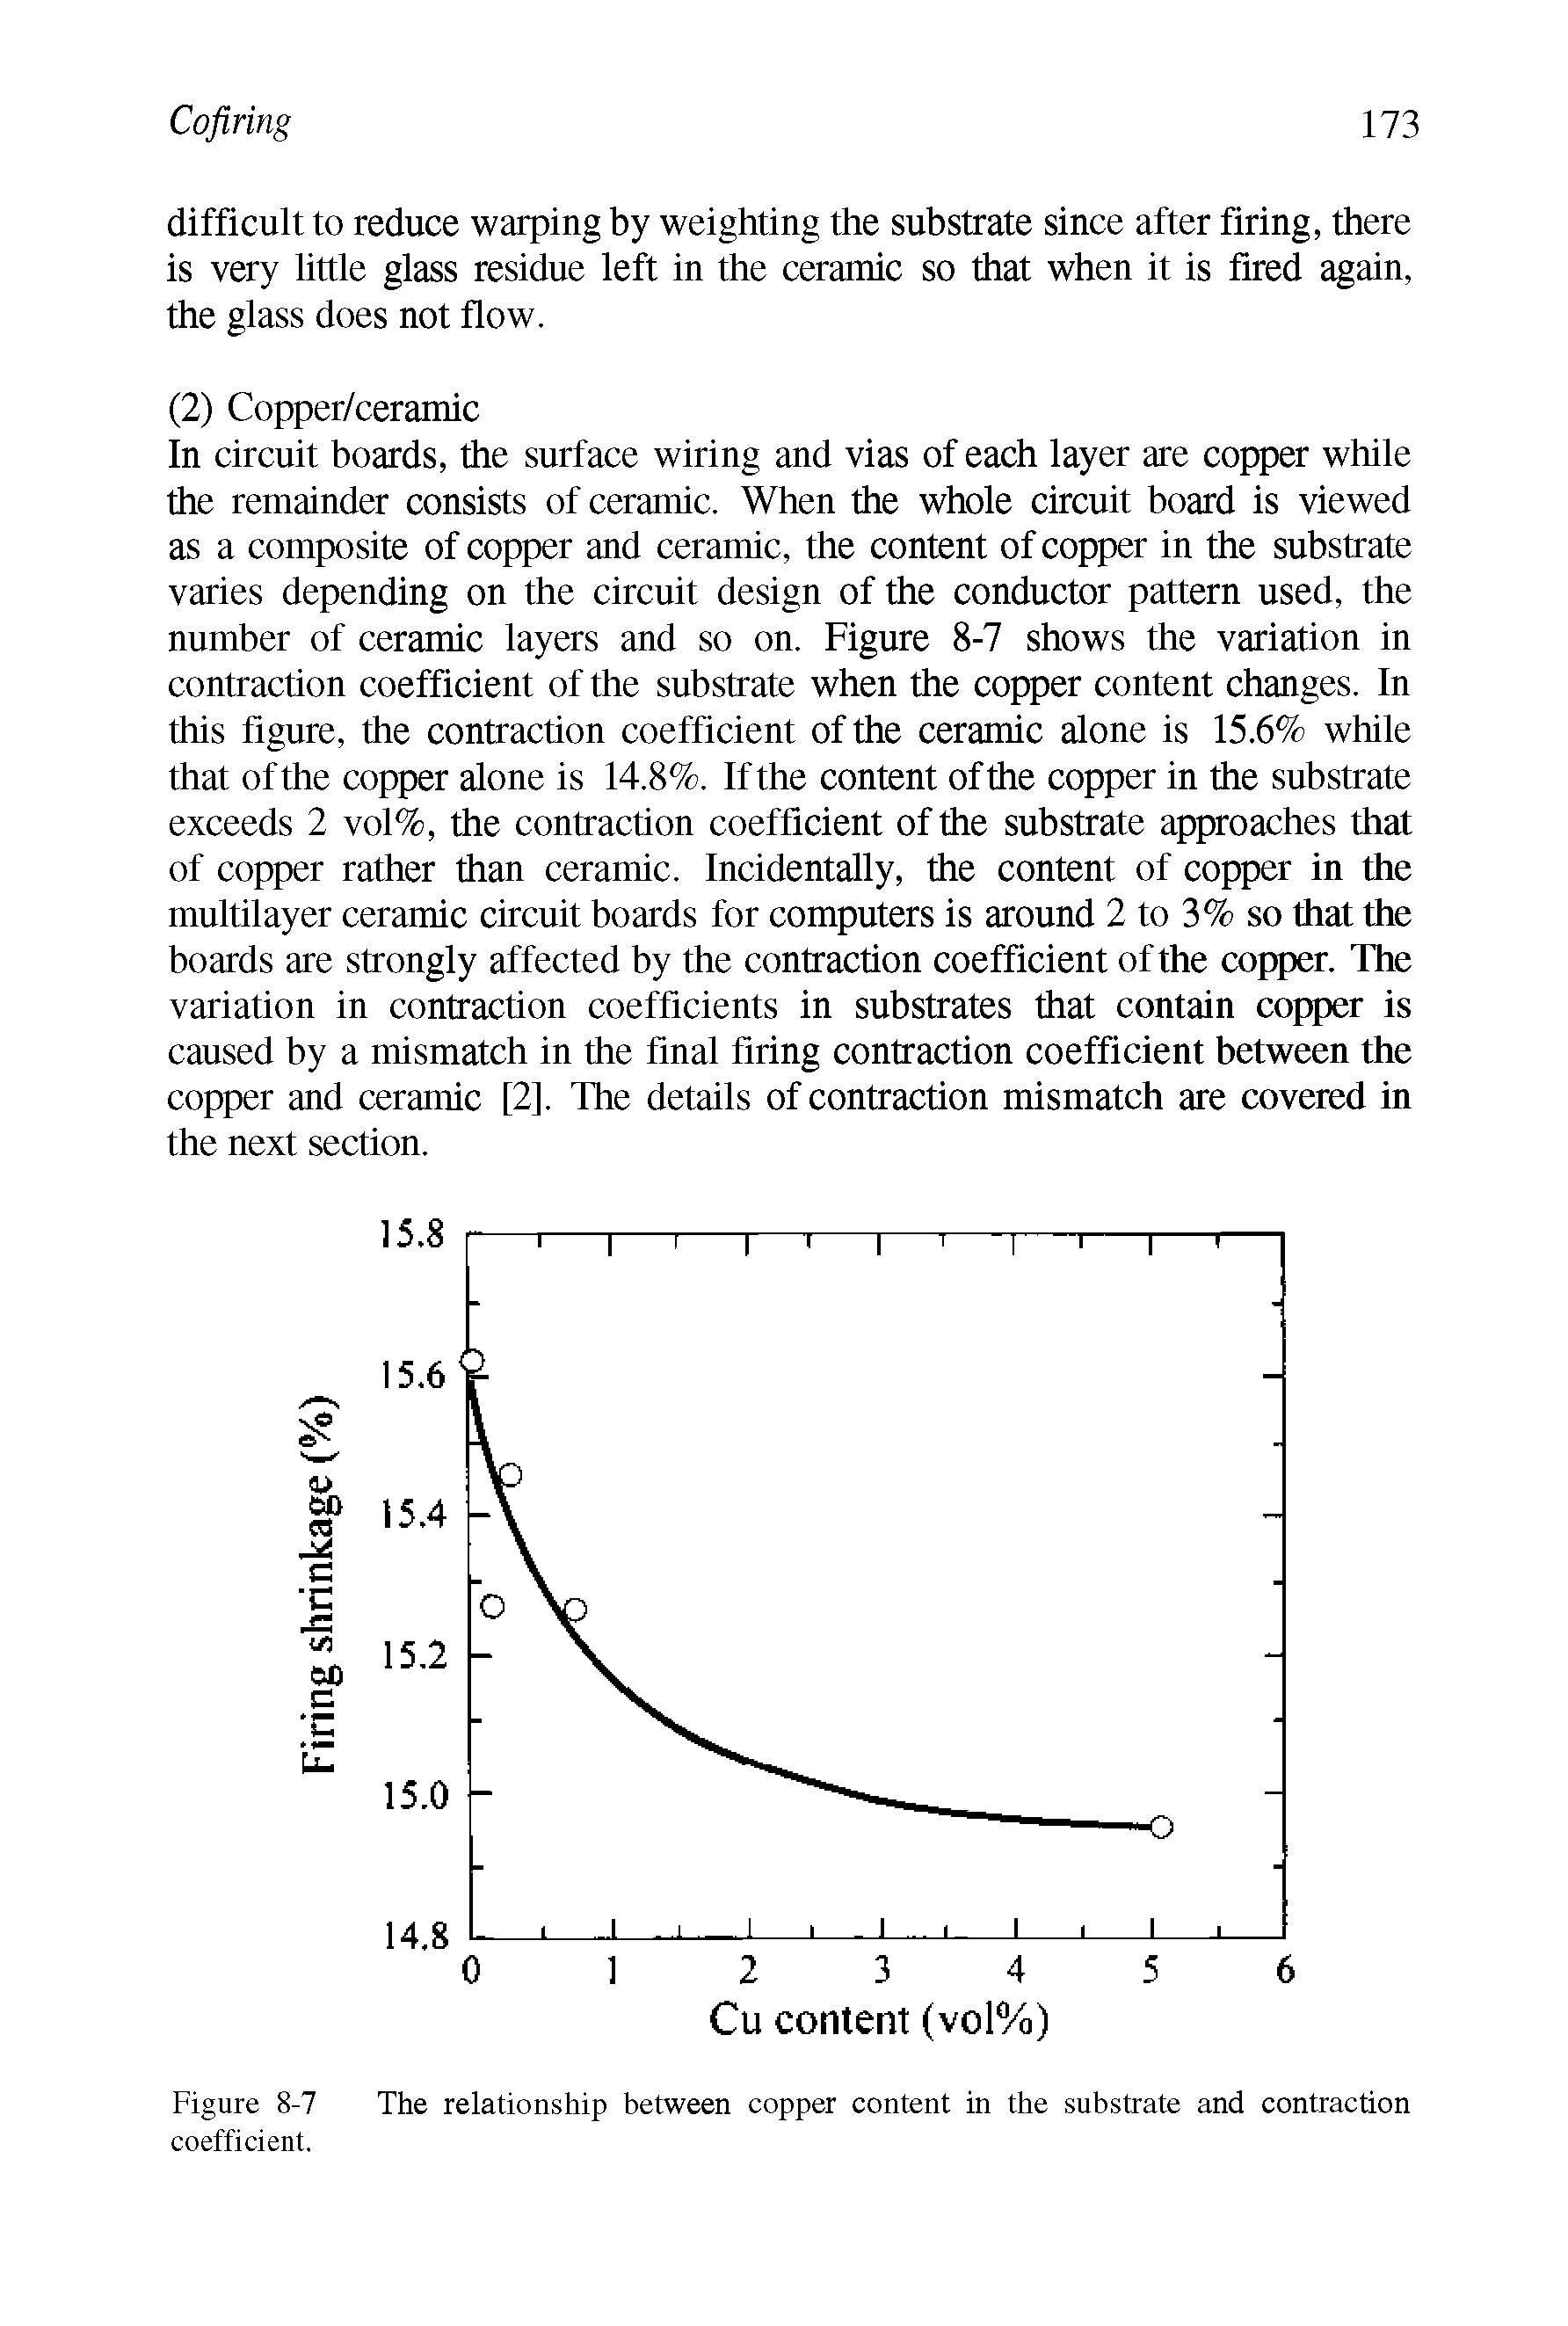 Figure 8-7 The relationship between copper content in the substrate and contraction coefficient.